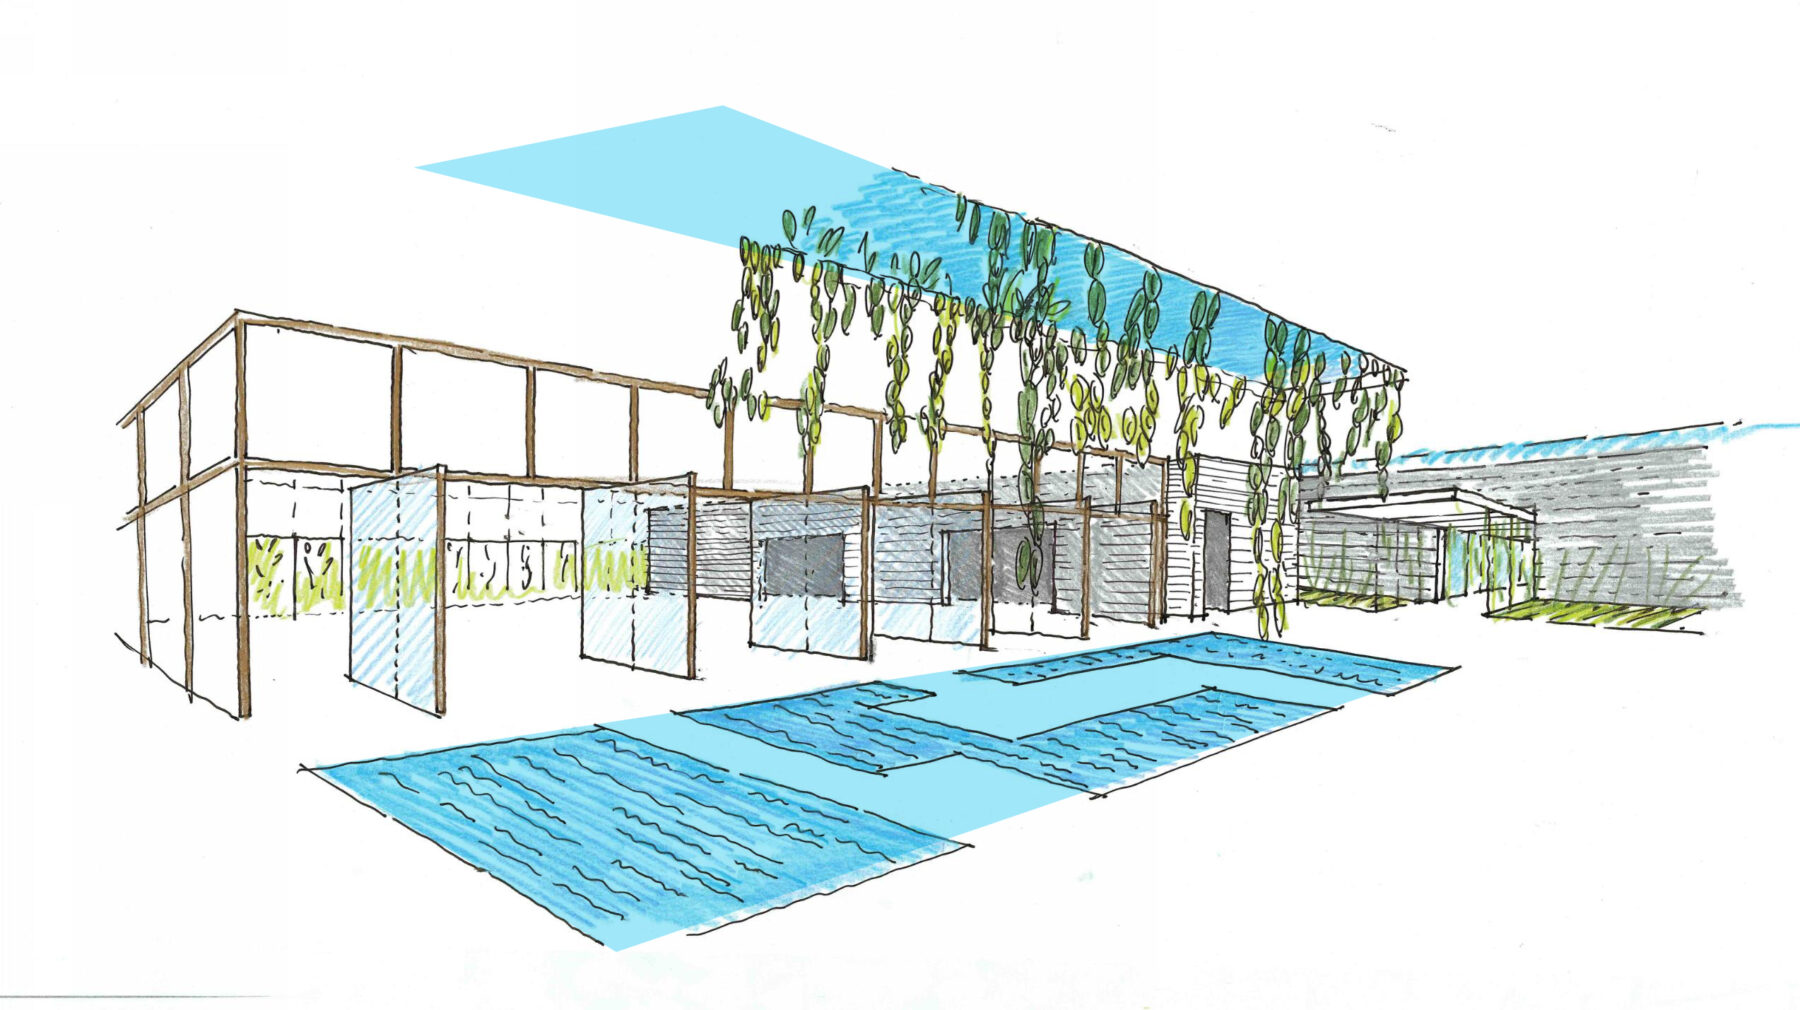 Early concept sketches of the Event Center courtyard